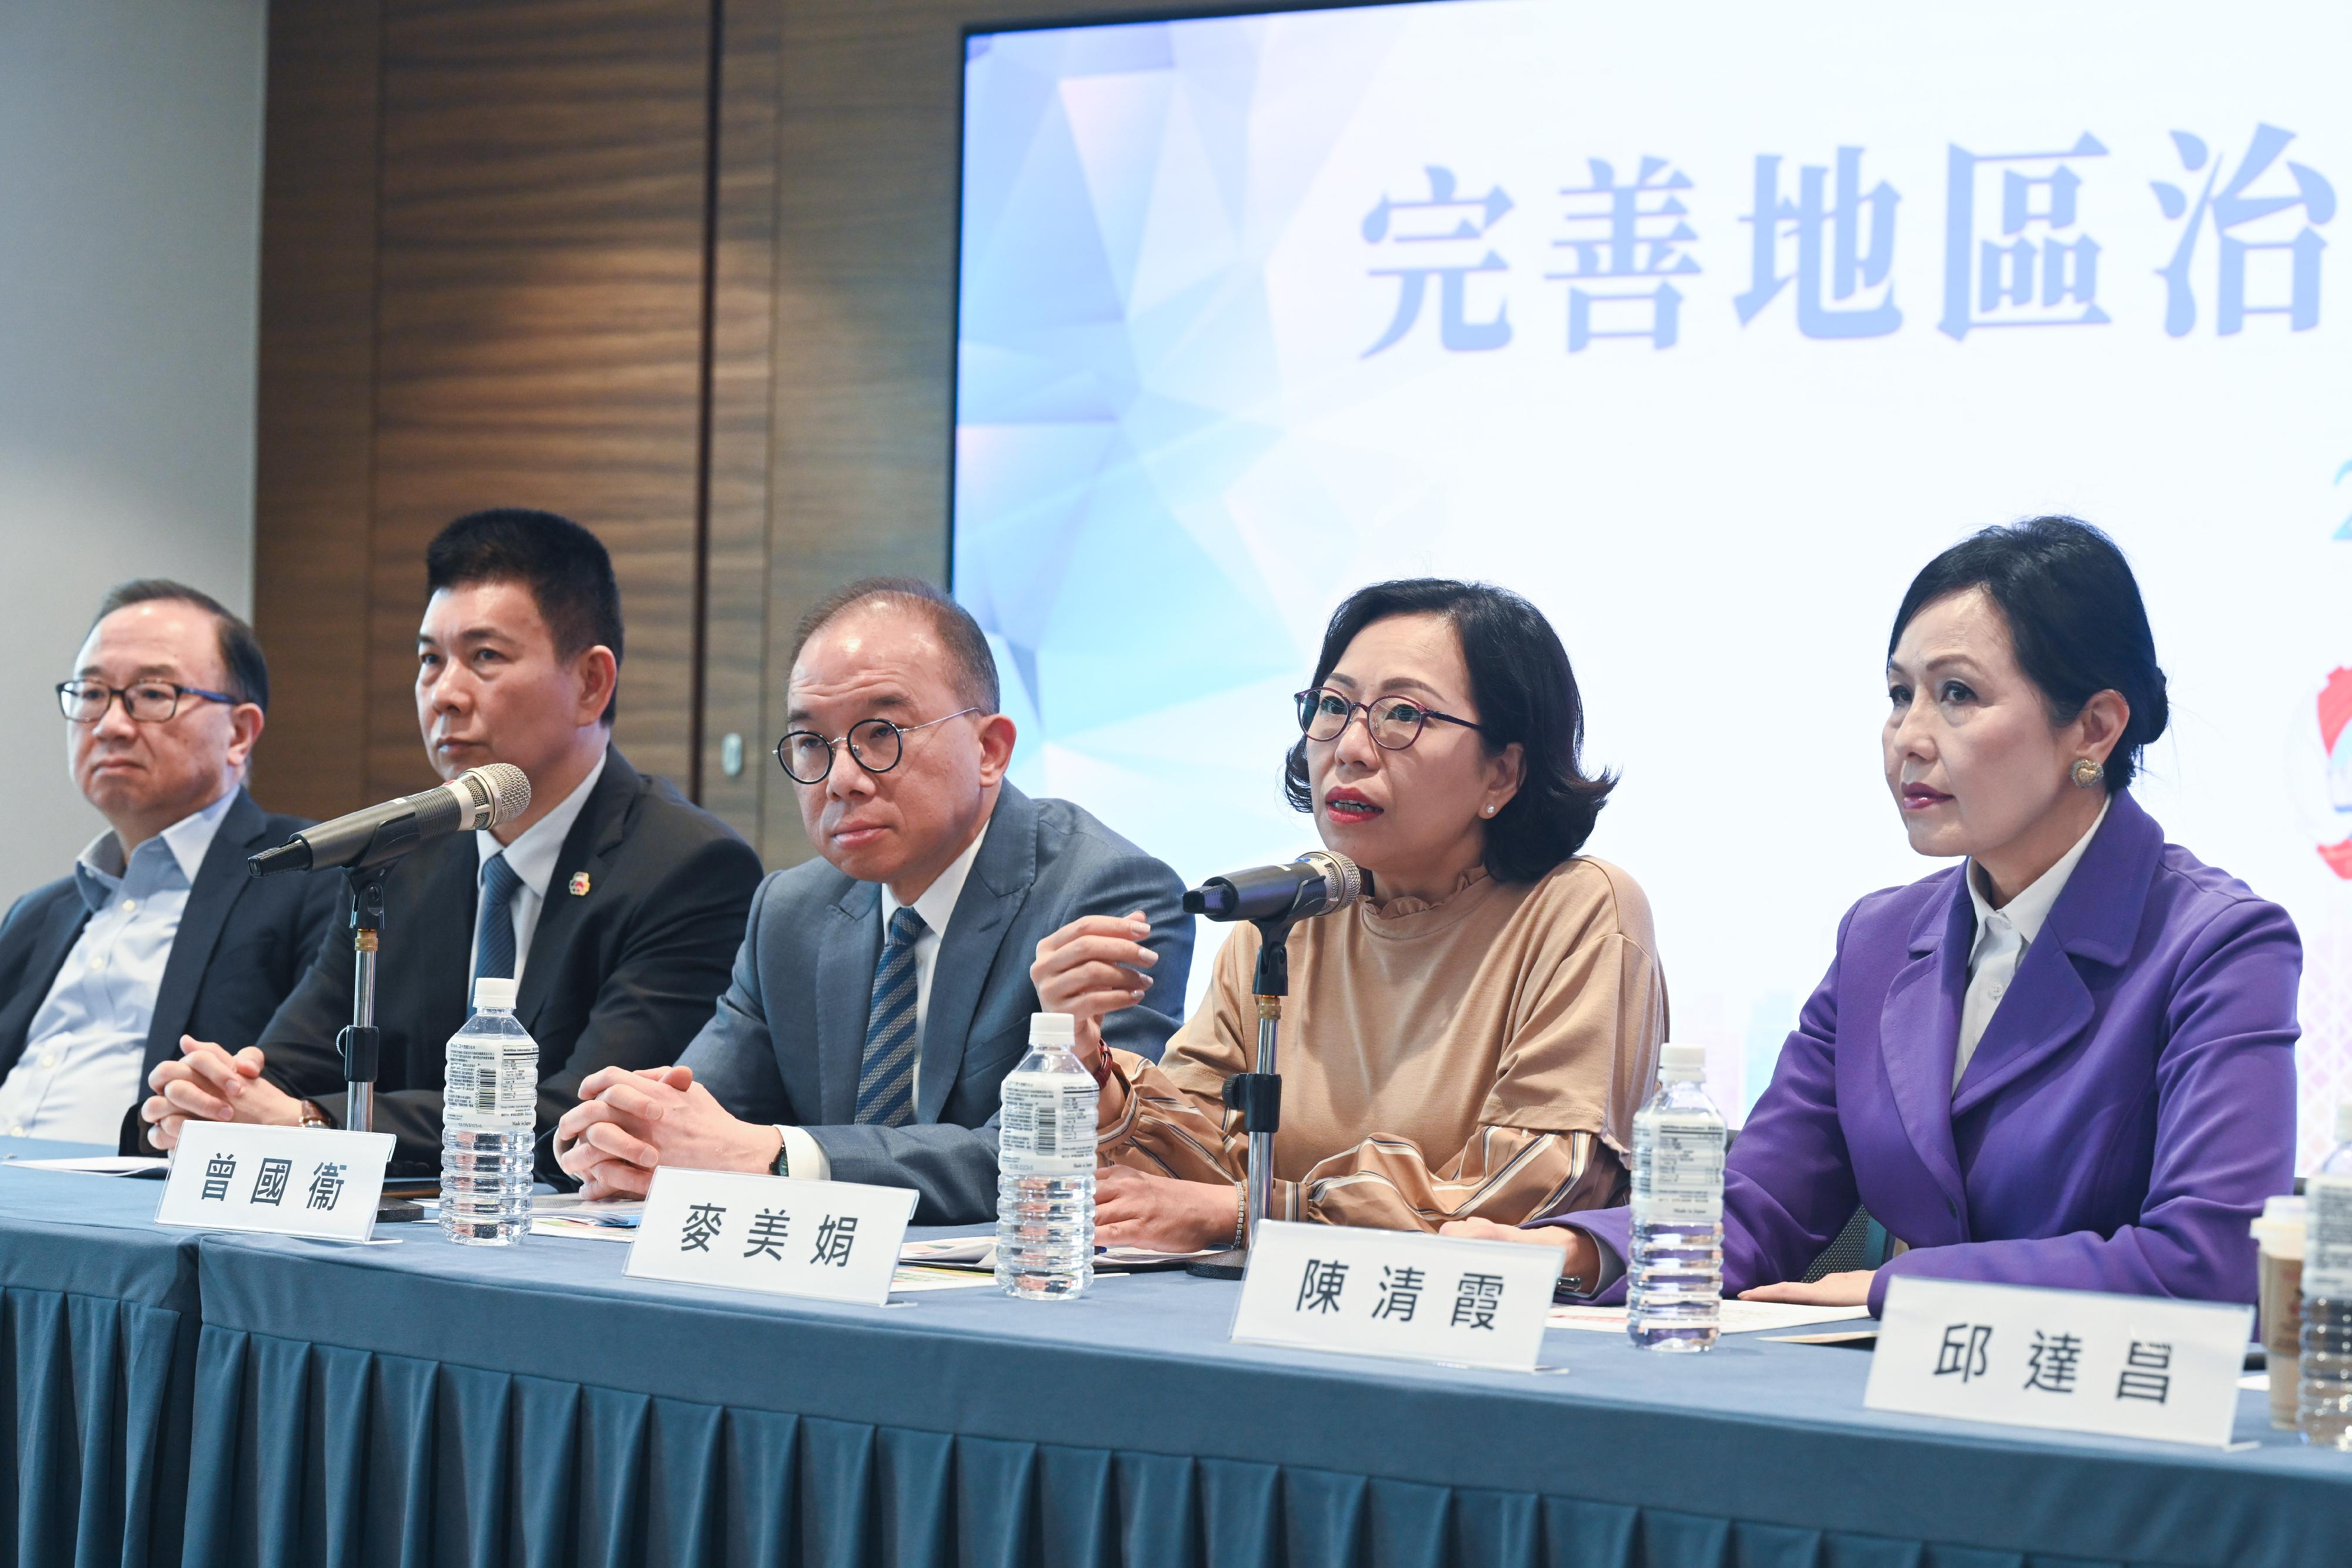 The Secretary for Constitutional and Mainland Affairs, Mr Erick Tsang Kwok-wai, (third left), and the Secretary for Home and Youth Affairs, Miss Alice Mak, (fourth left), this morning (May 5) chaired a briefing session to highlight the benefits of the proposals on improving governance at the district level to Hong Kong deputies to the National People's Congress and Hong Kong members of the Chinese People's Political Consultative Conference.